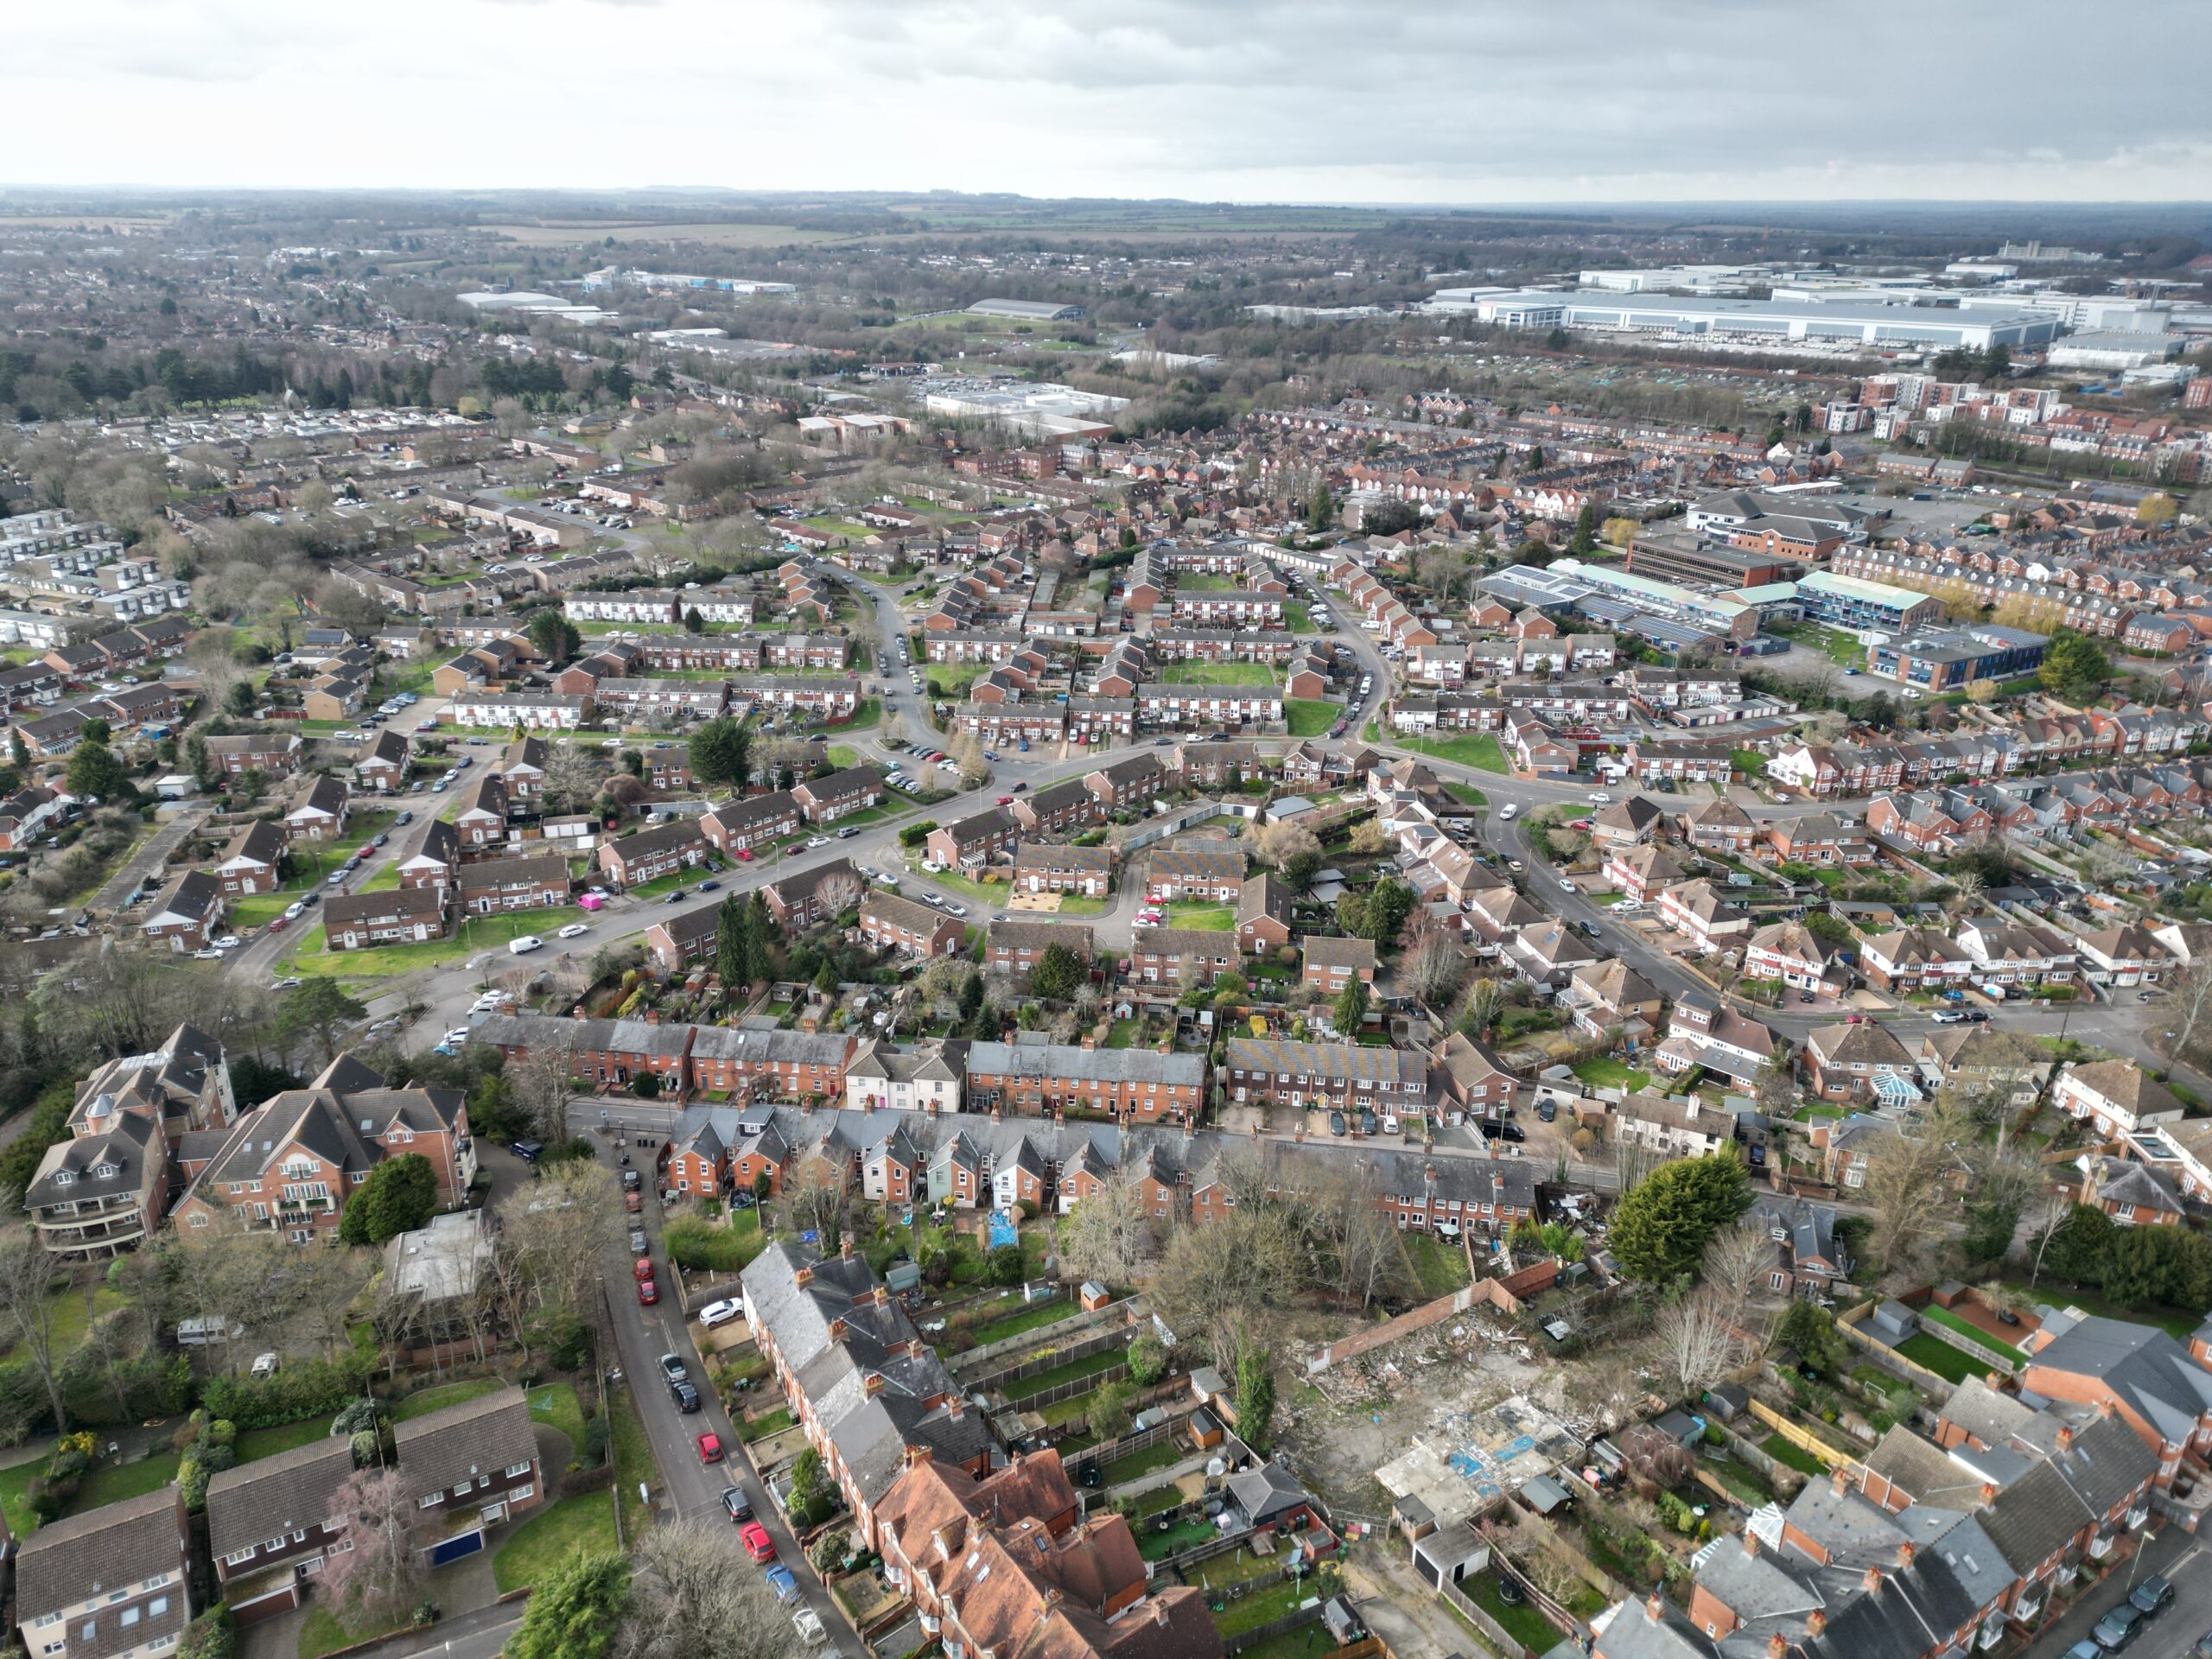 Aerial view of a community consisting of brick buildings and trees